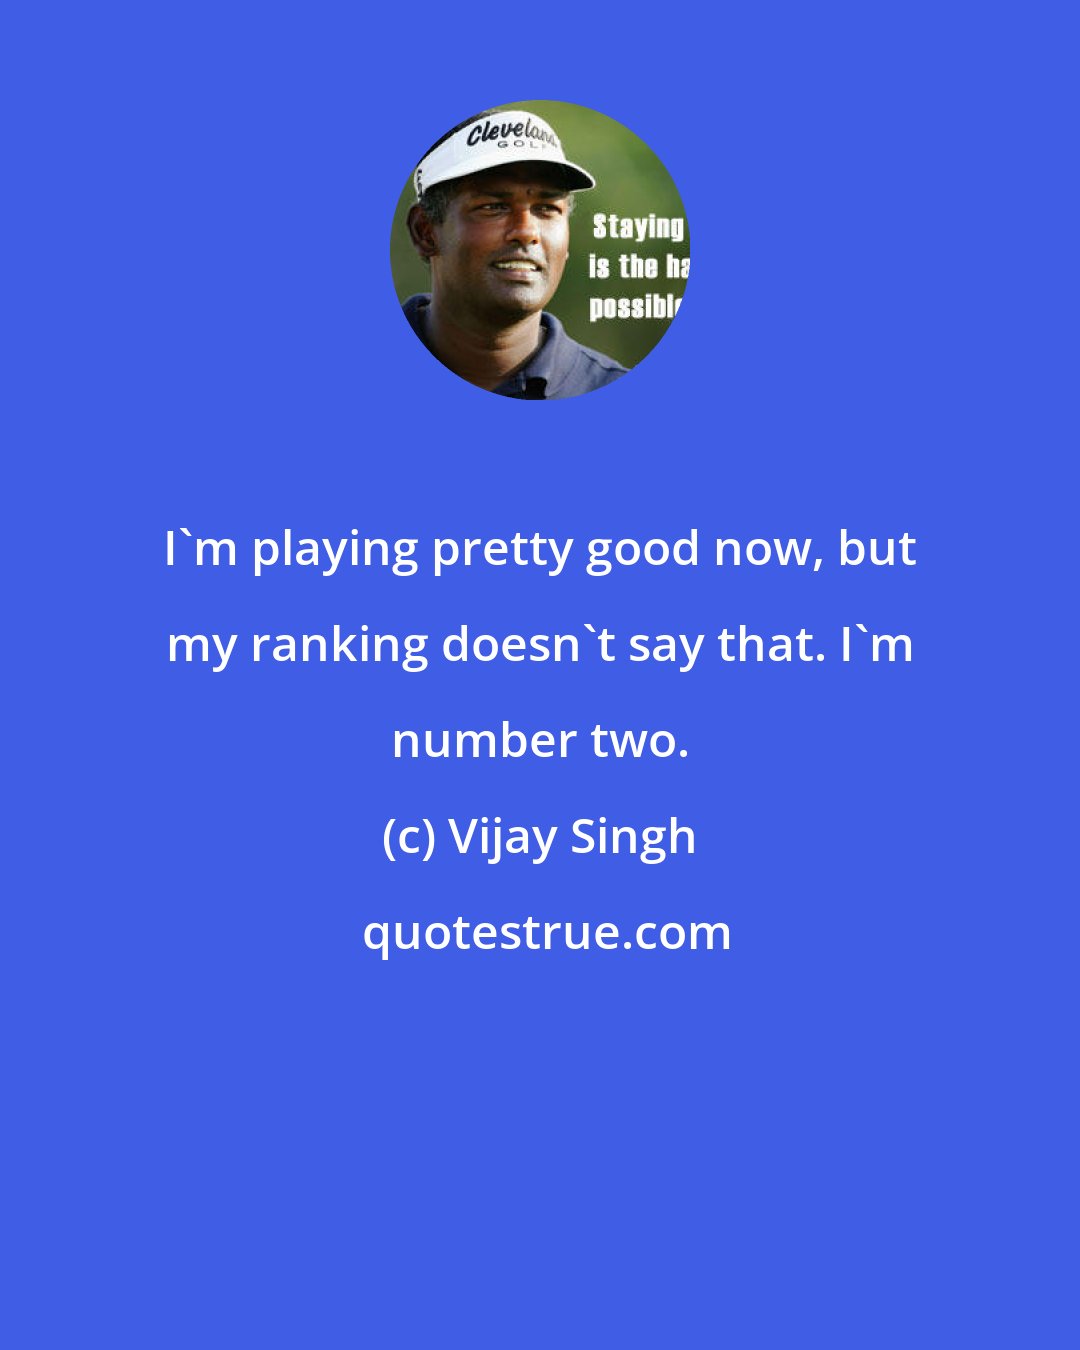 Vijay Singh: I'm playing pretty good now, but my ranking doesn't say that. I'm number two.